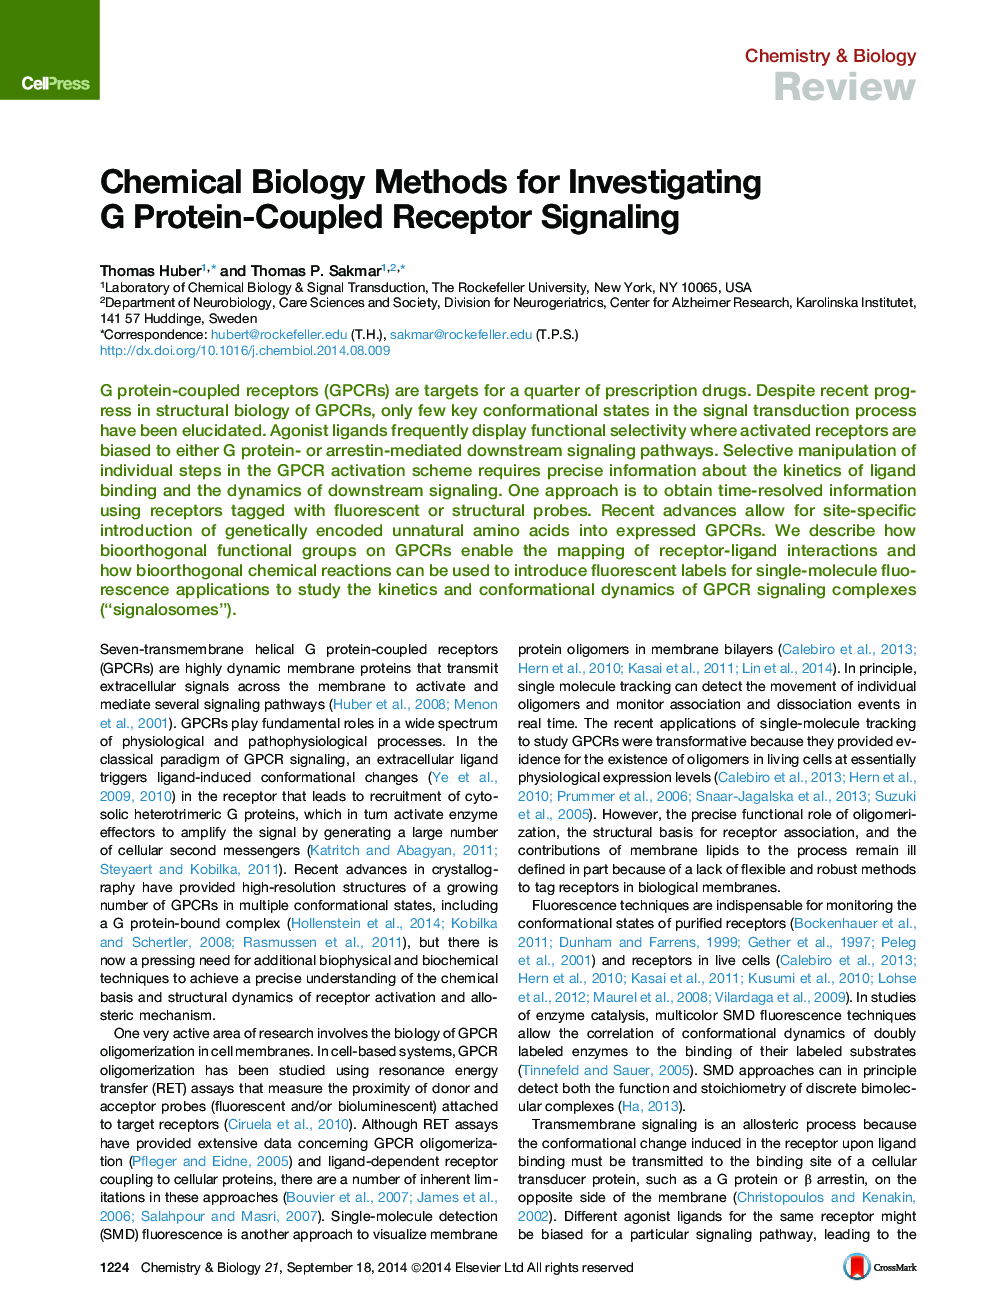 Chemical Biology Methods for Investigating G Protein-Coupled Receptor Signaling